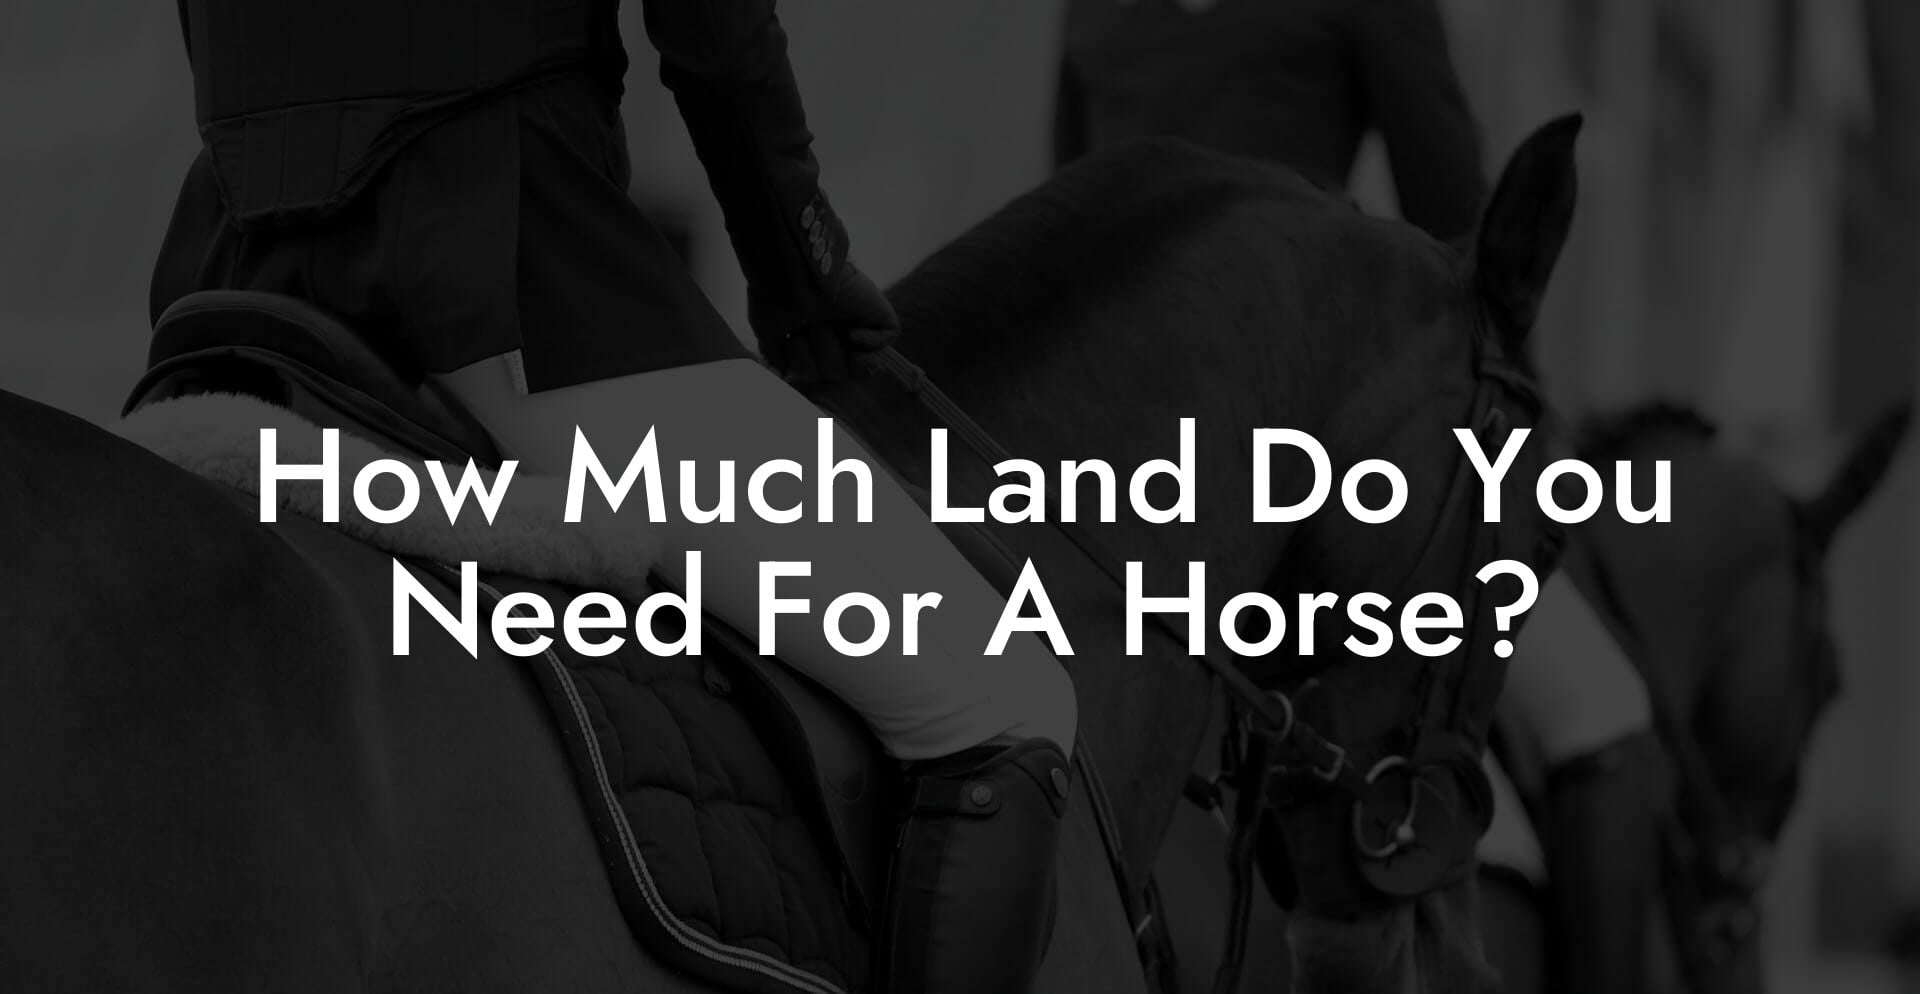 How Much Land Do You Need For A Horse?